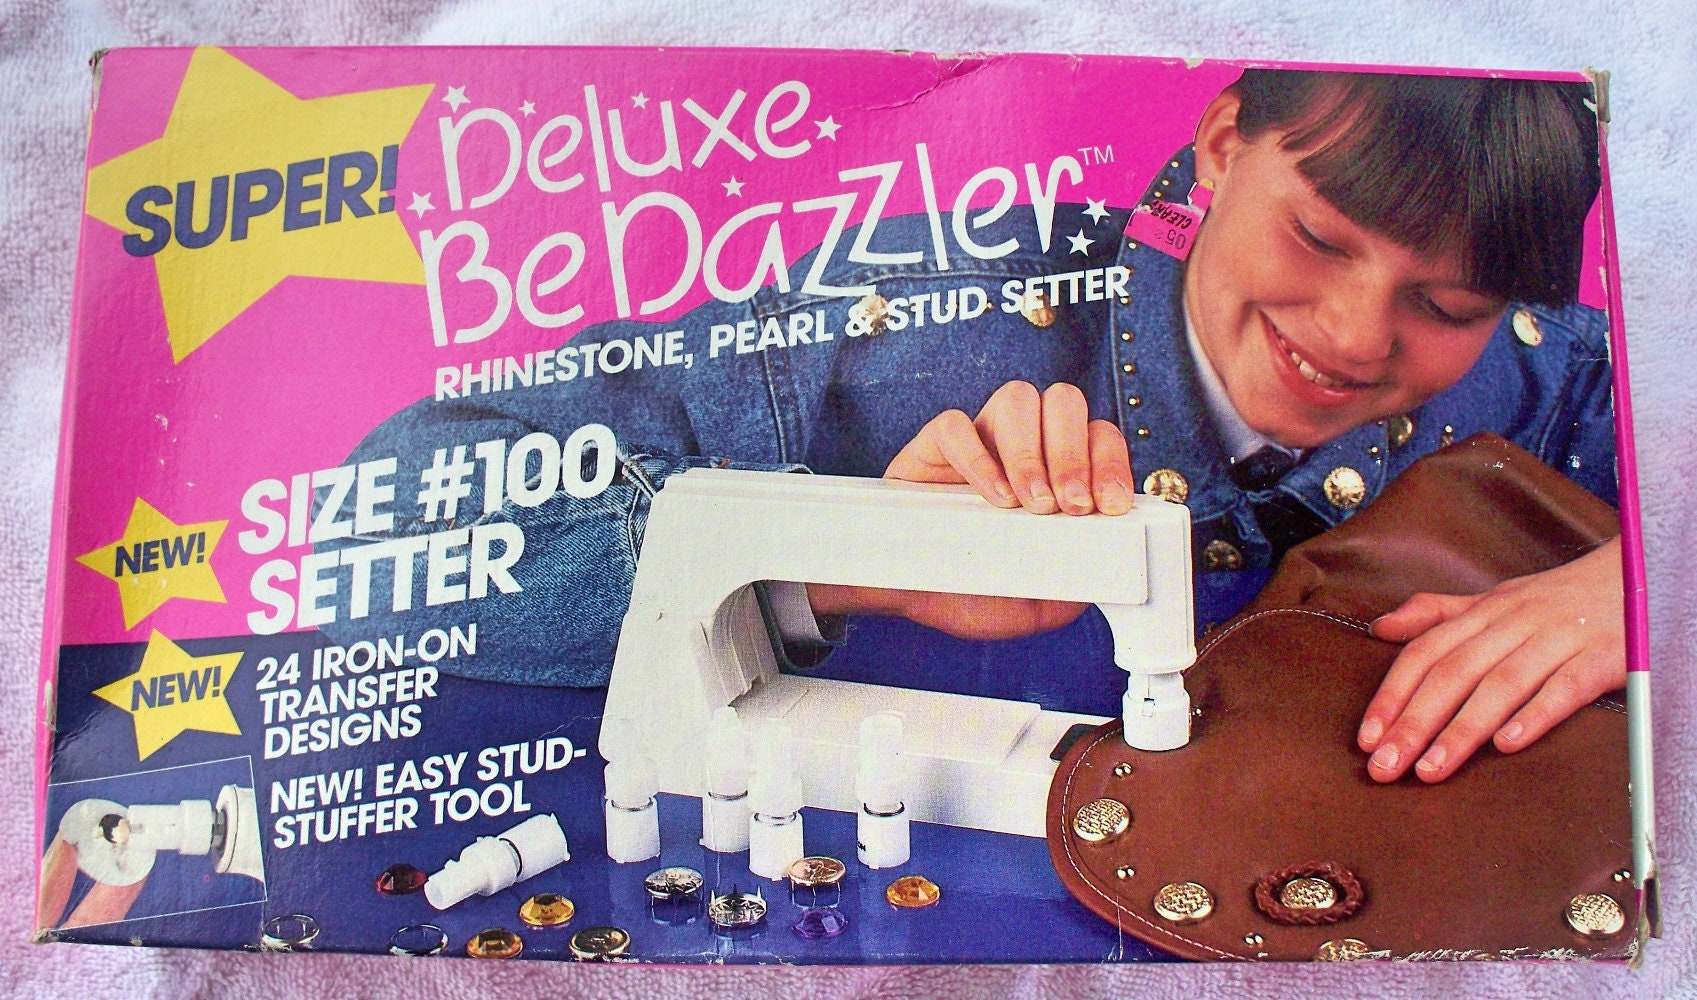 Bedazzler Deluxe MEGA Set- The Original Bedazzler Rhinestone and Stud  Setting Machine Complete Kit